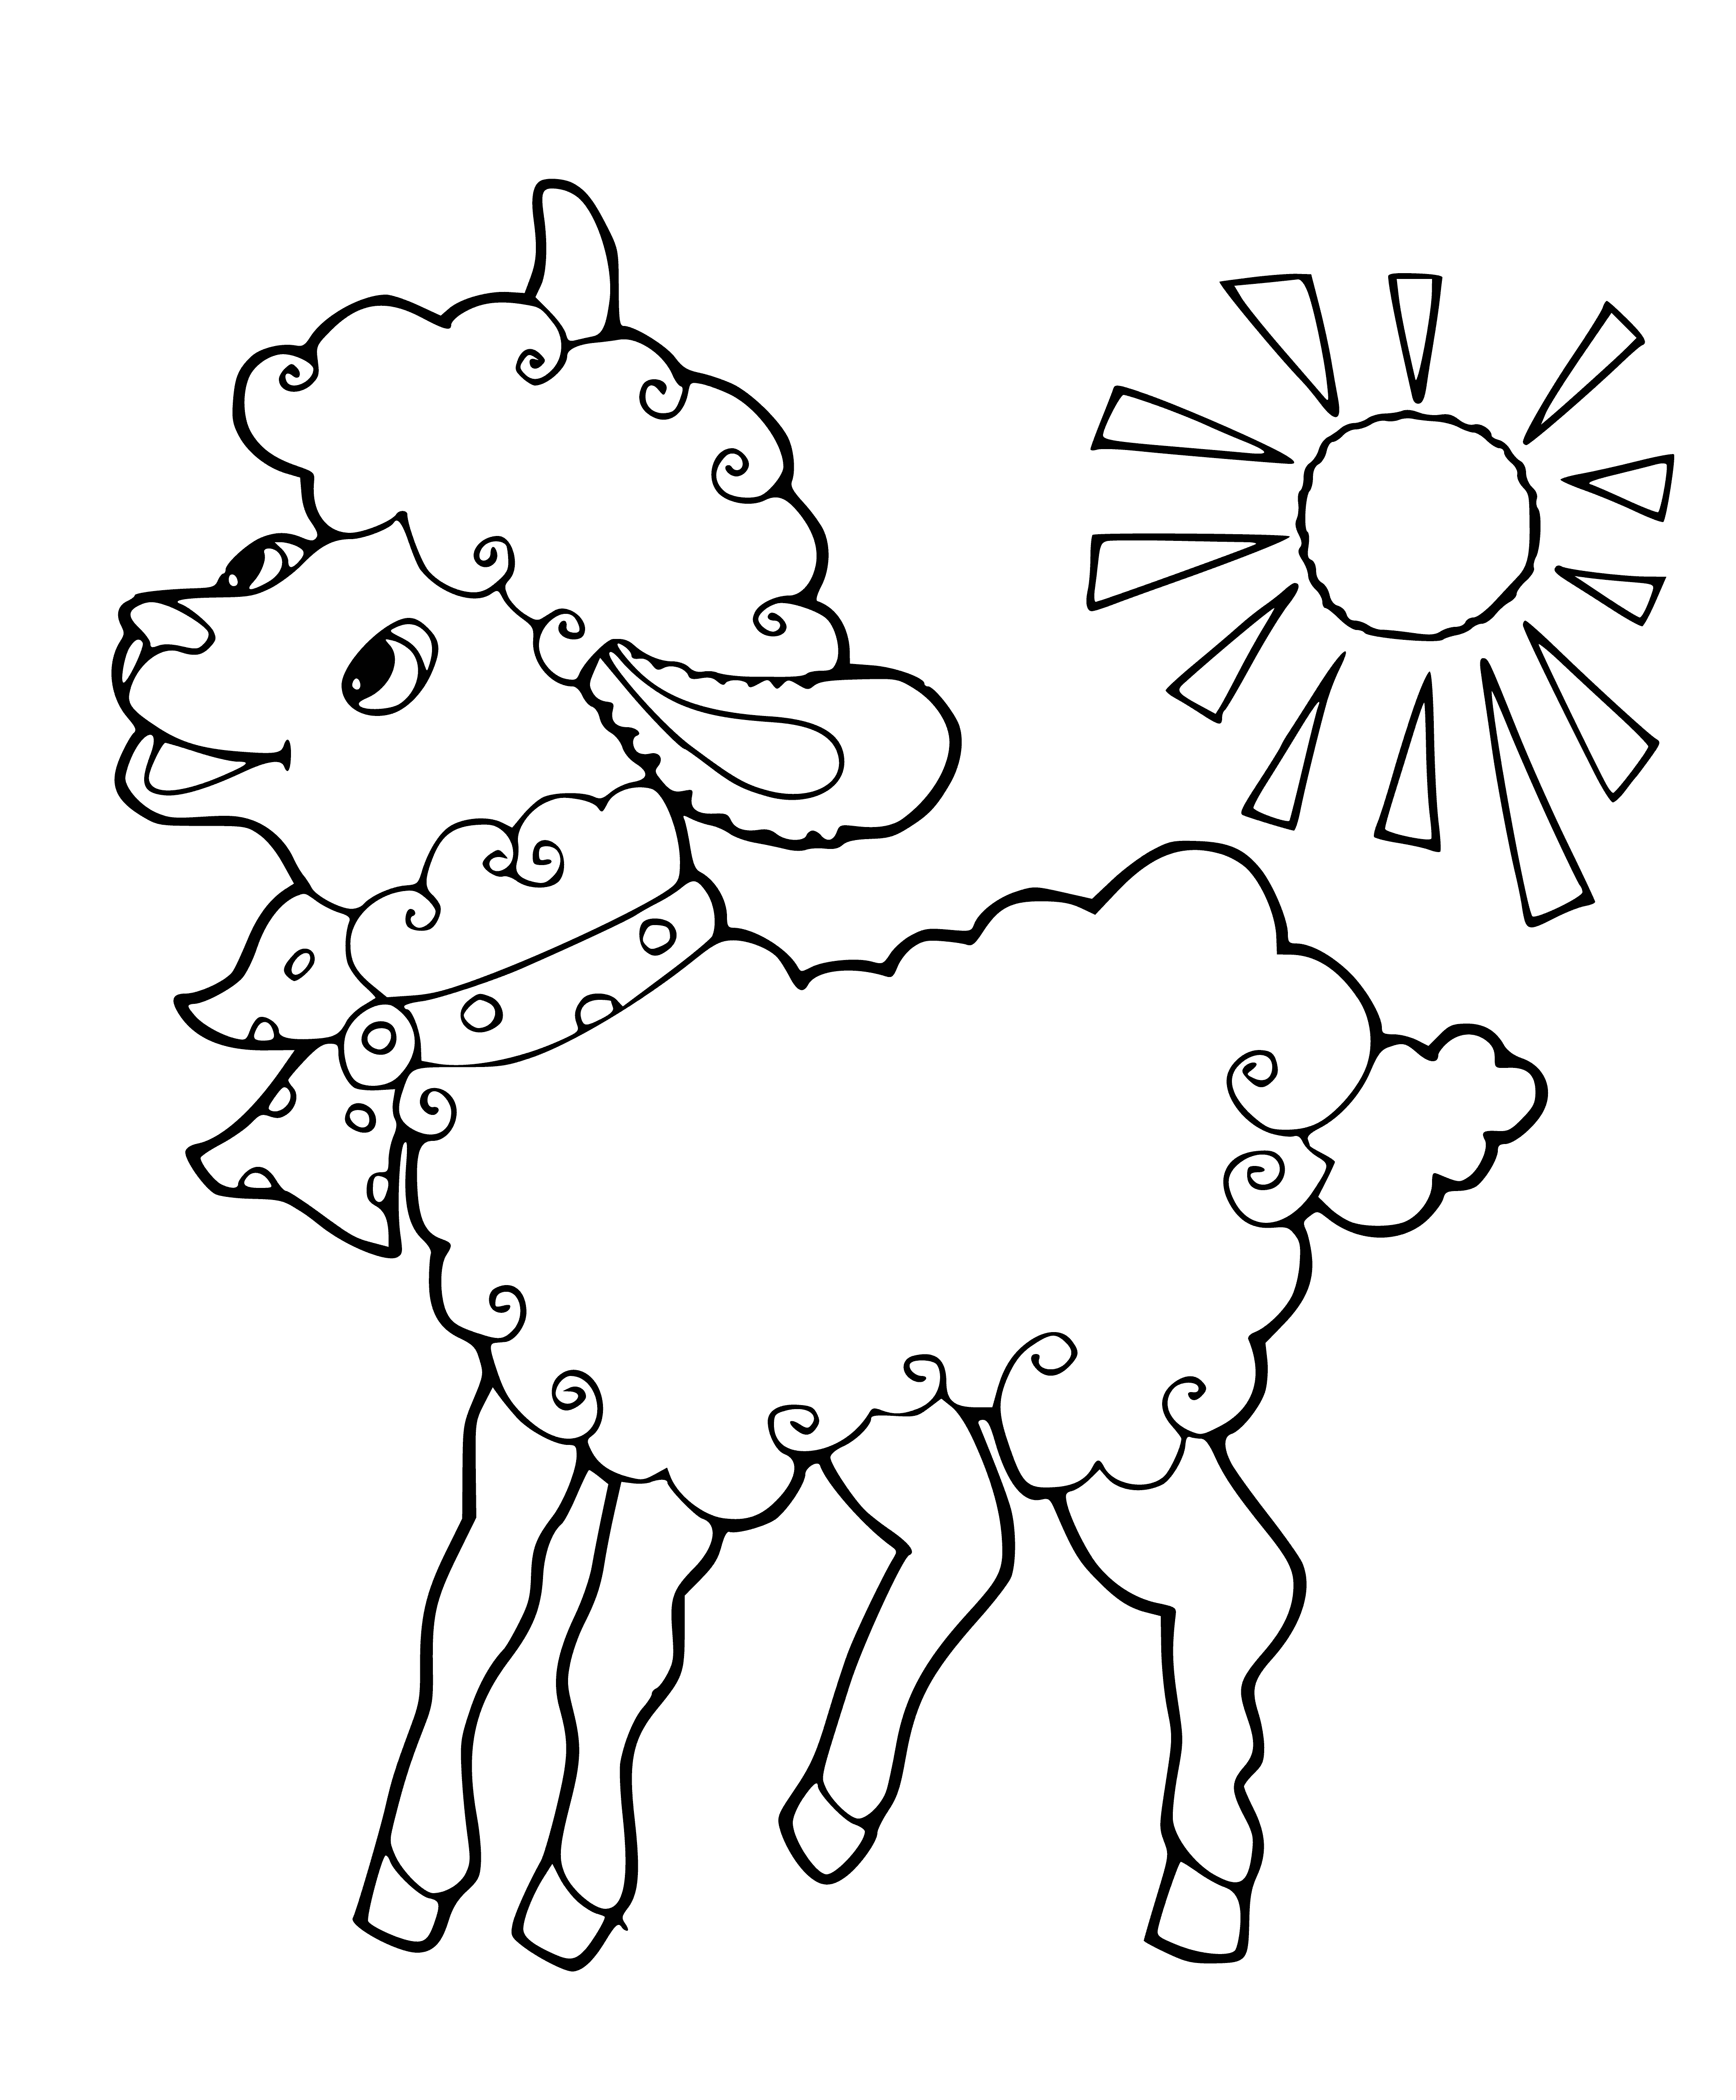 coloring page: Sheep with bow has white body and black head, with a brown and yellow bow.